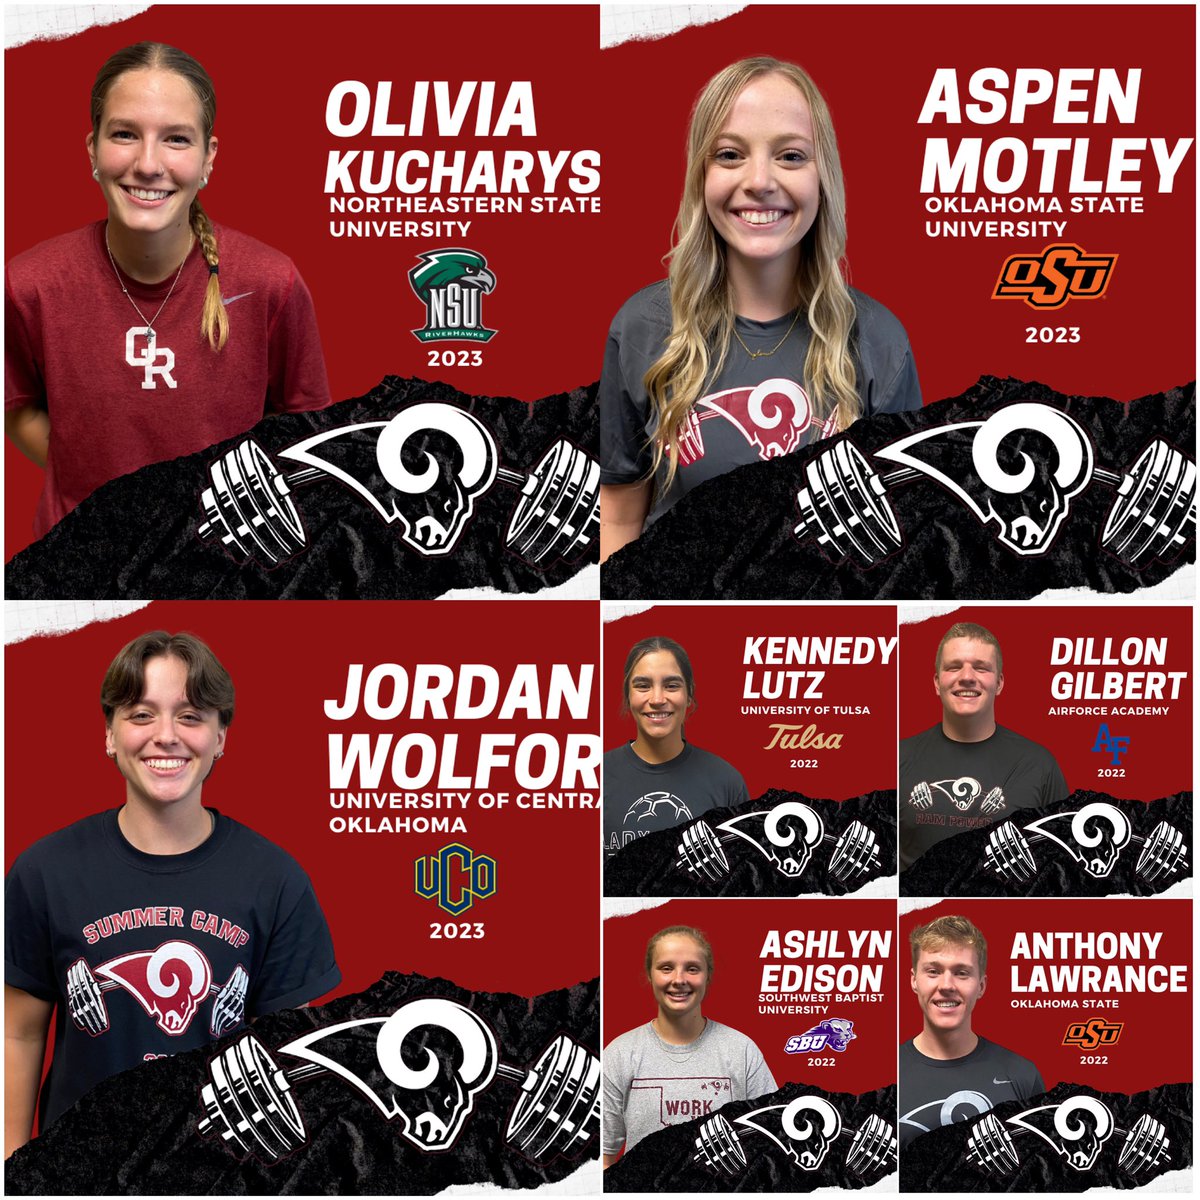 The Owasso Strength and Conditioning Program is excited to announce that we are accepting applications for our 6th annual Summer Internship Program that will start June 3rd! Please review the following information and join past interns that have gone on to accomplish big things!